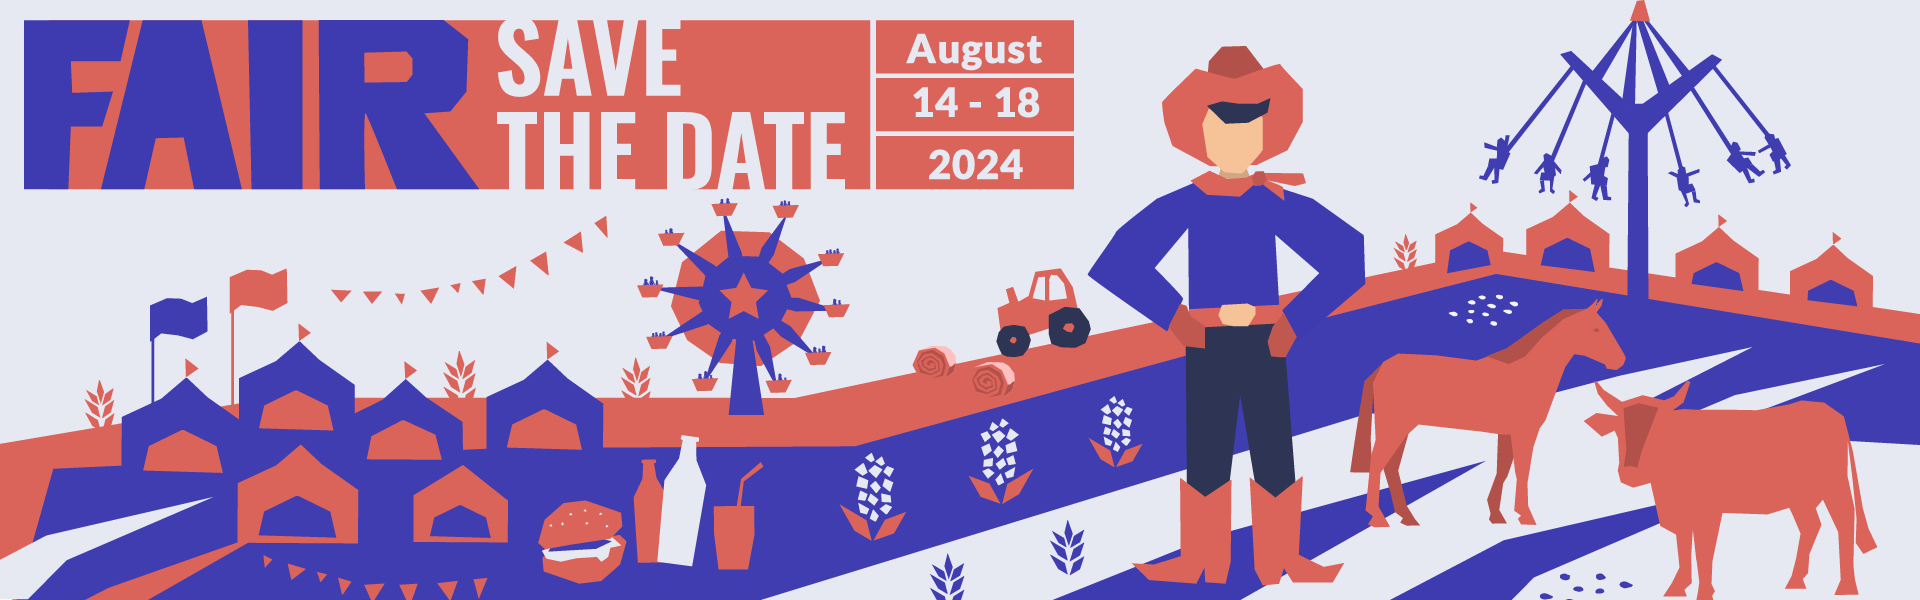 Save the Date! The 2024 Lyon County Fair will be held on August 14-18th.